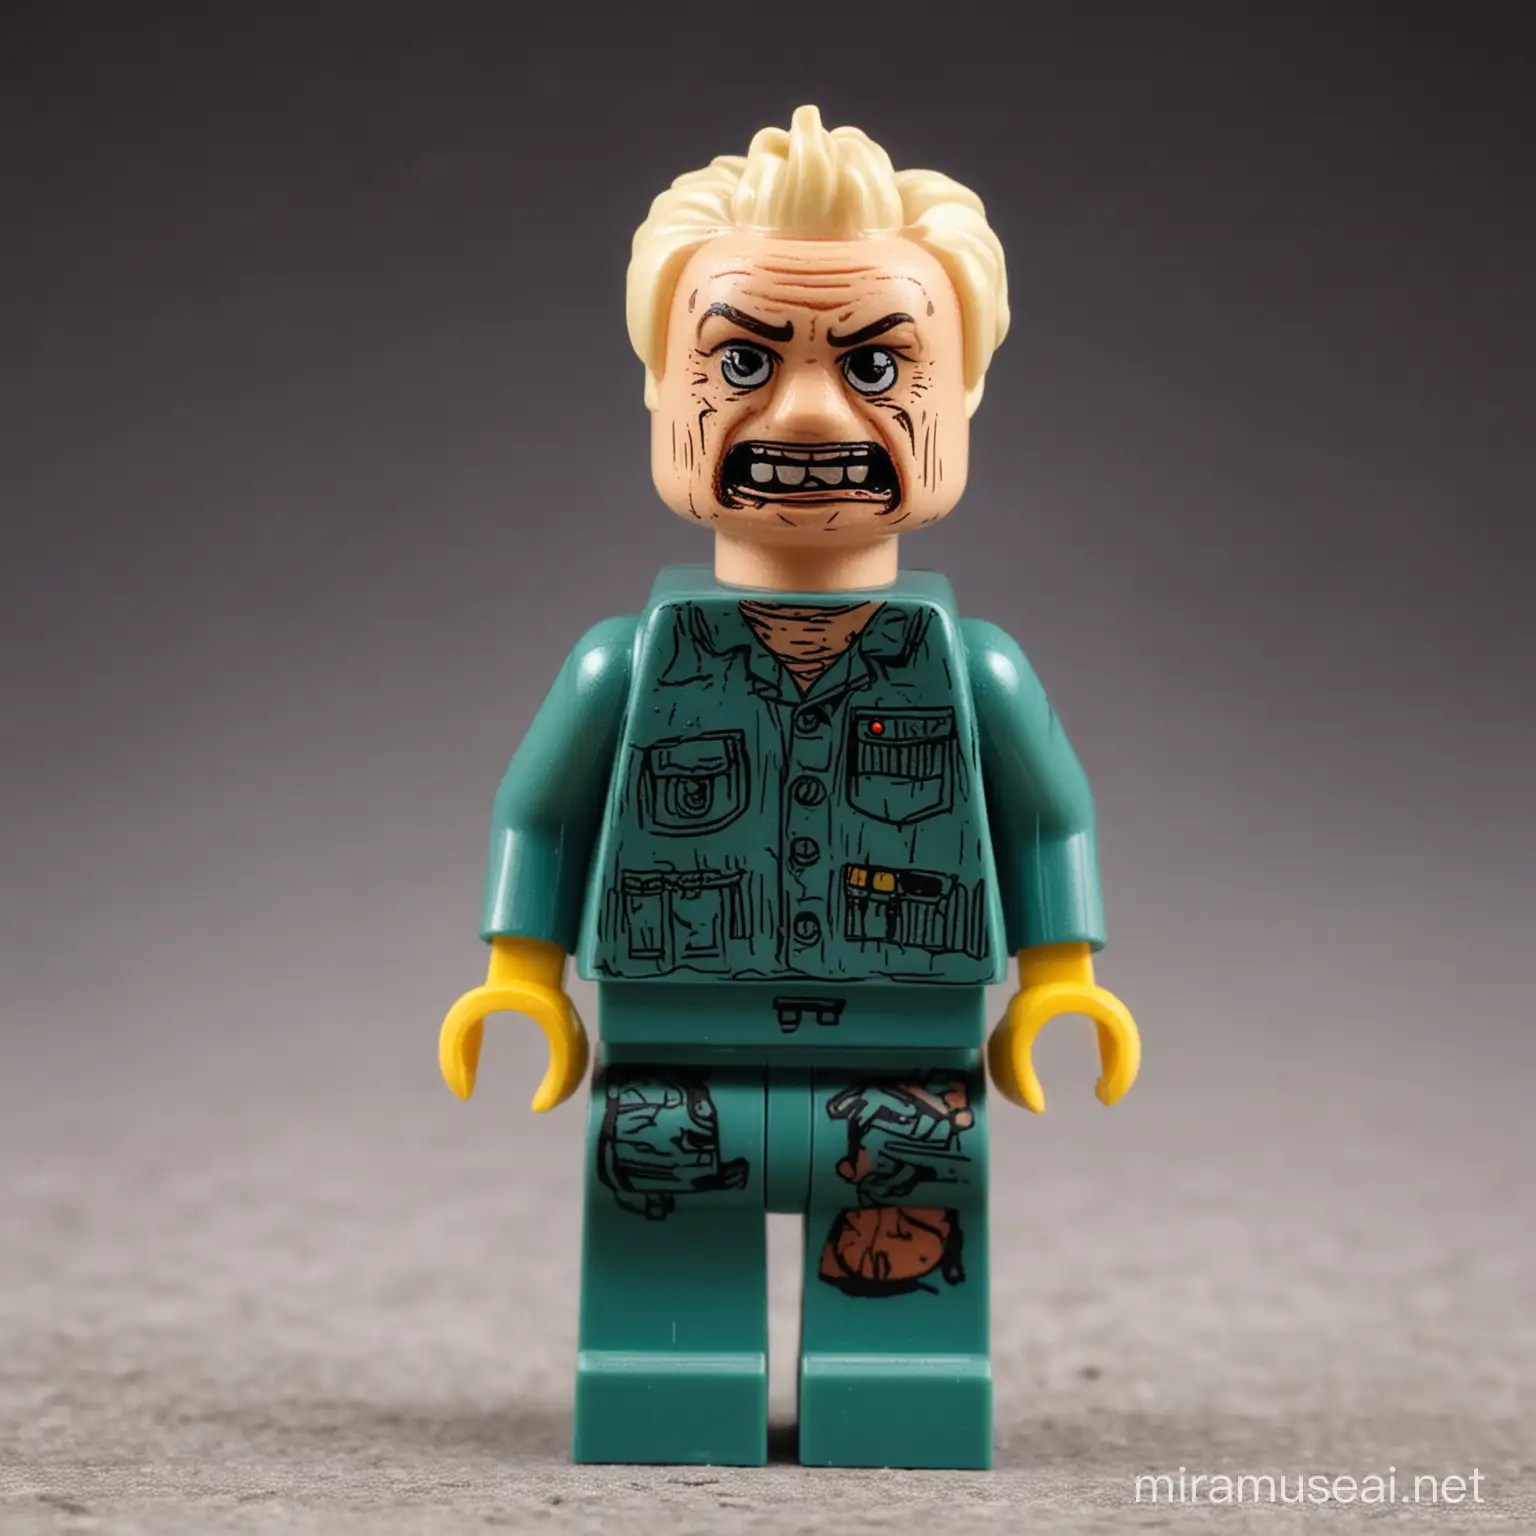 A meth addict Lego Minifigure. With a scabby face and bad teeth. Clothes that look like they have been worn for several days
